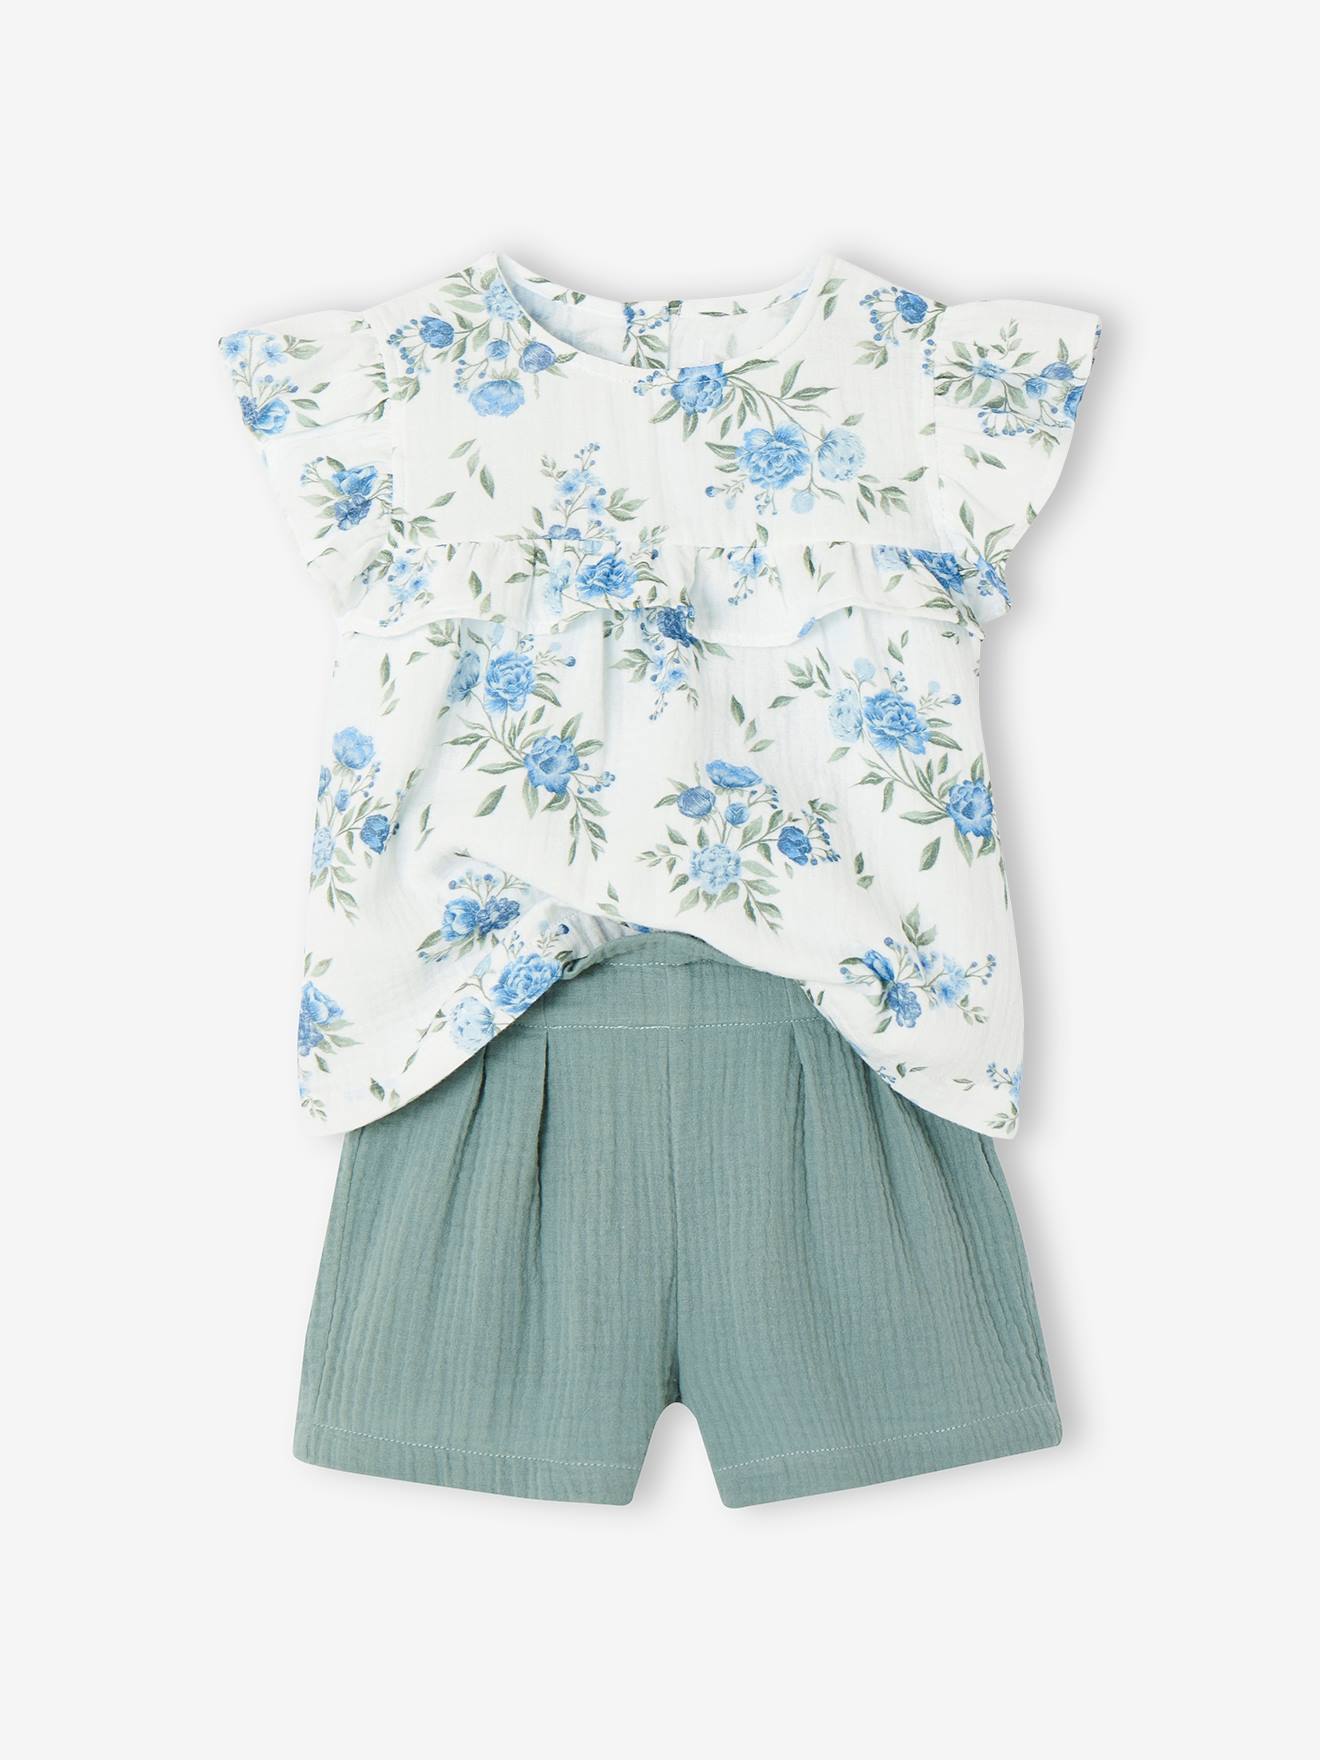 Occasion Wear Outfit: Blouse with Ruffles & Shorts in Cotton Gauze, for Girls printed blue